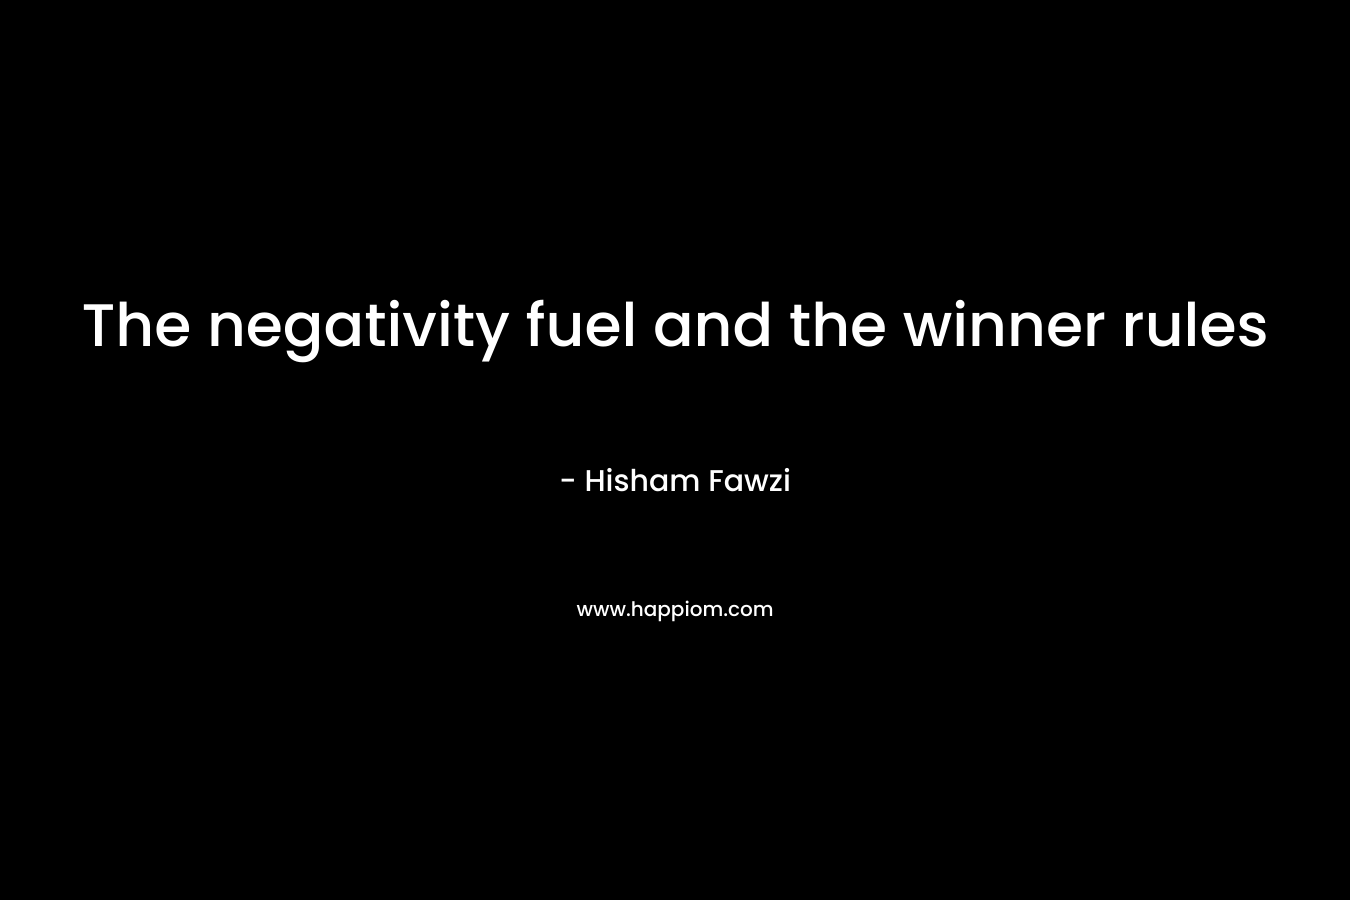 The negativity fuel and the winner rules